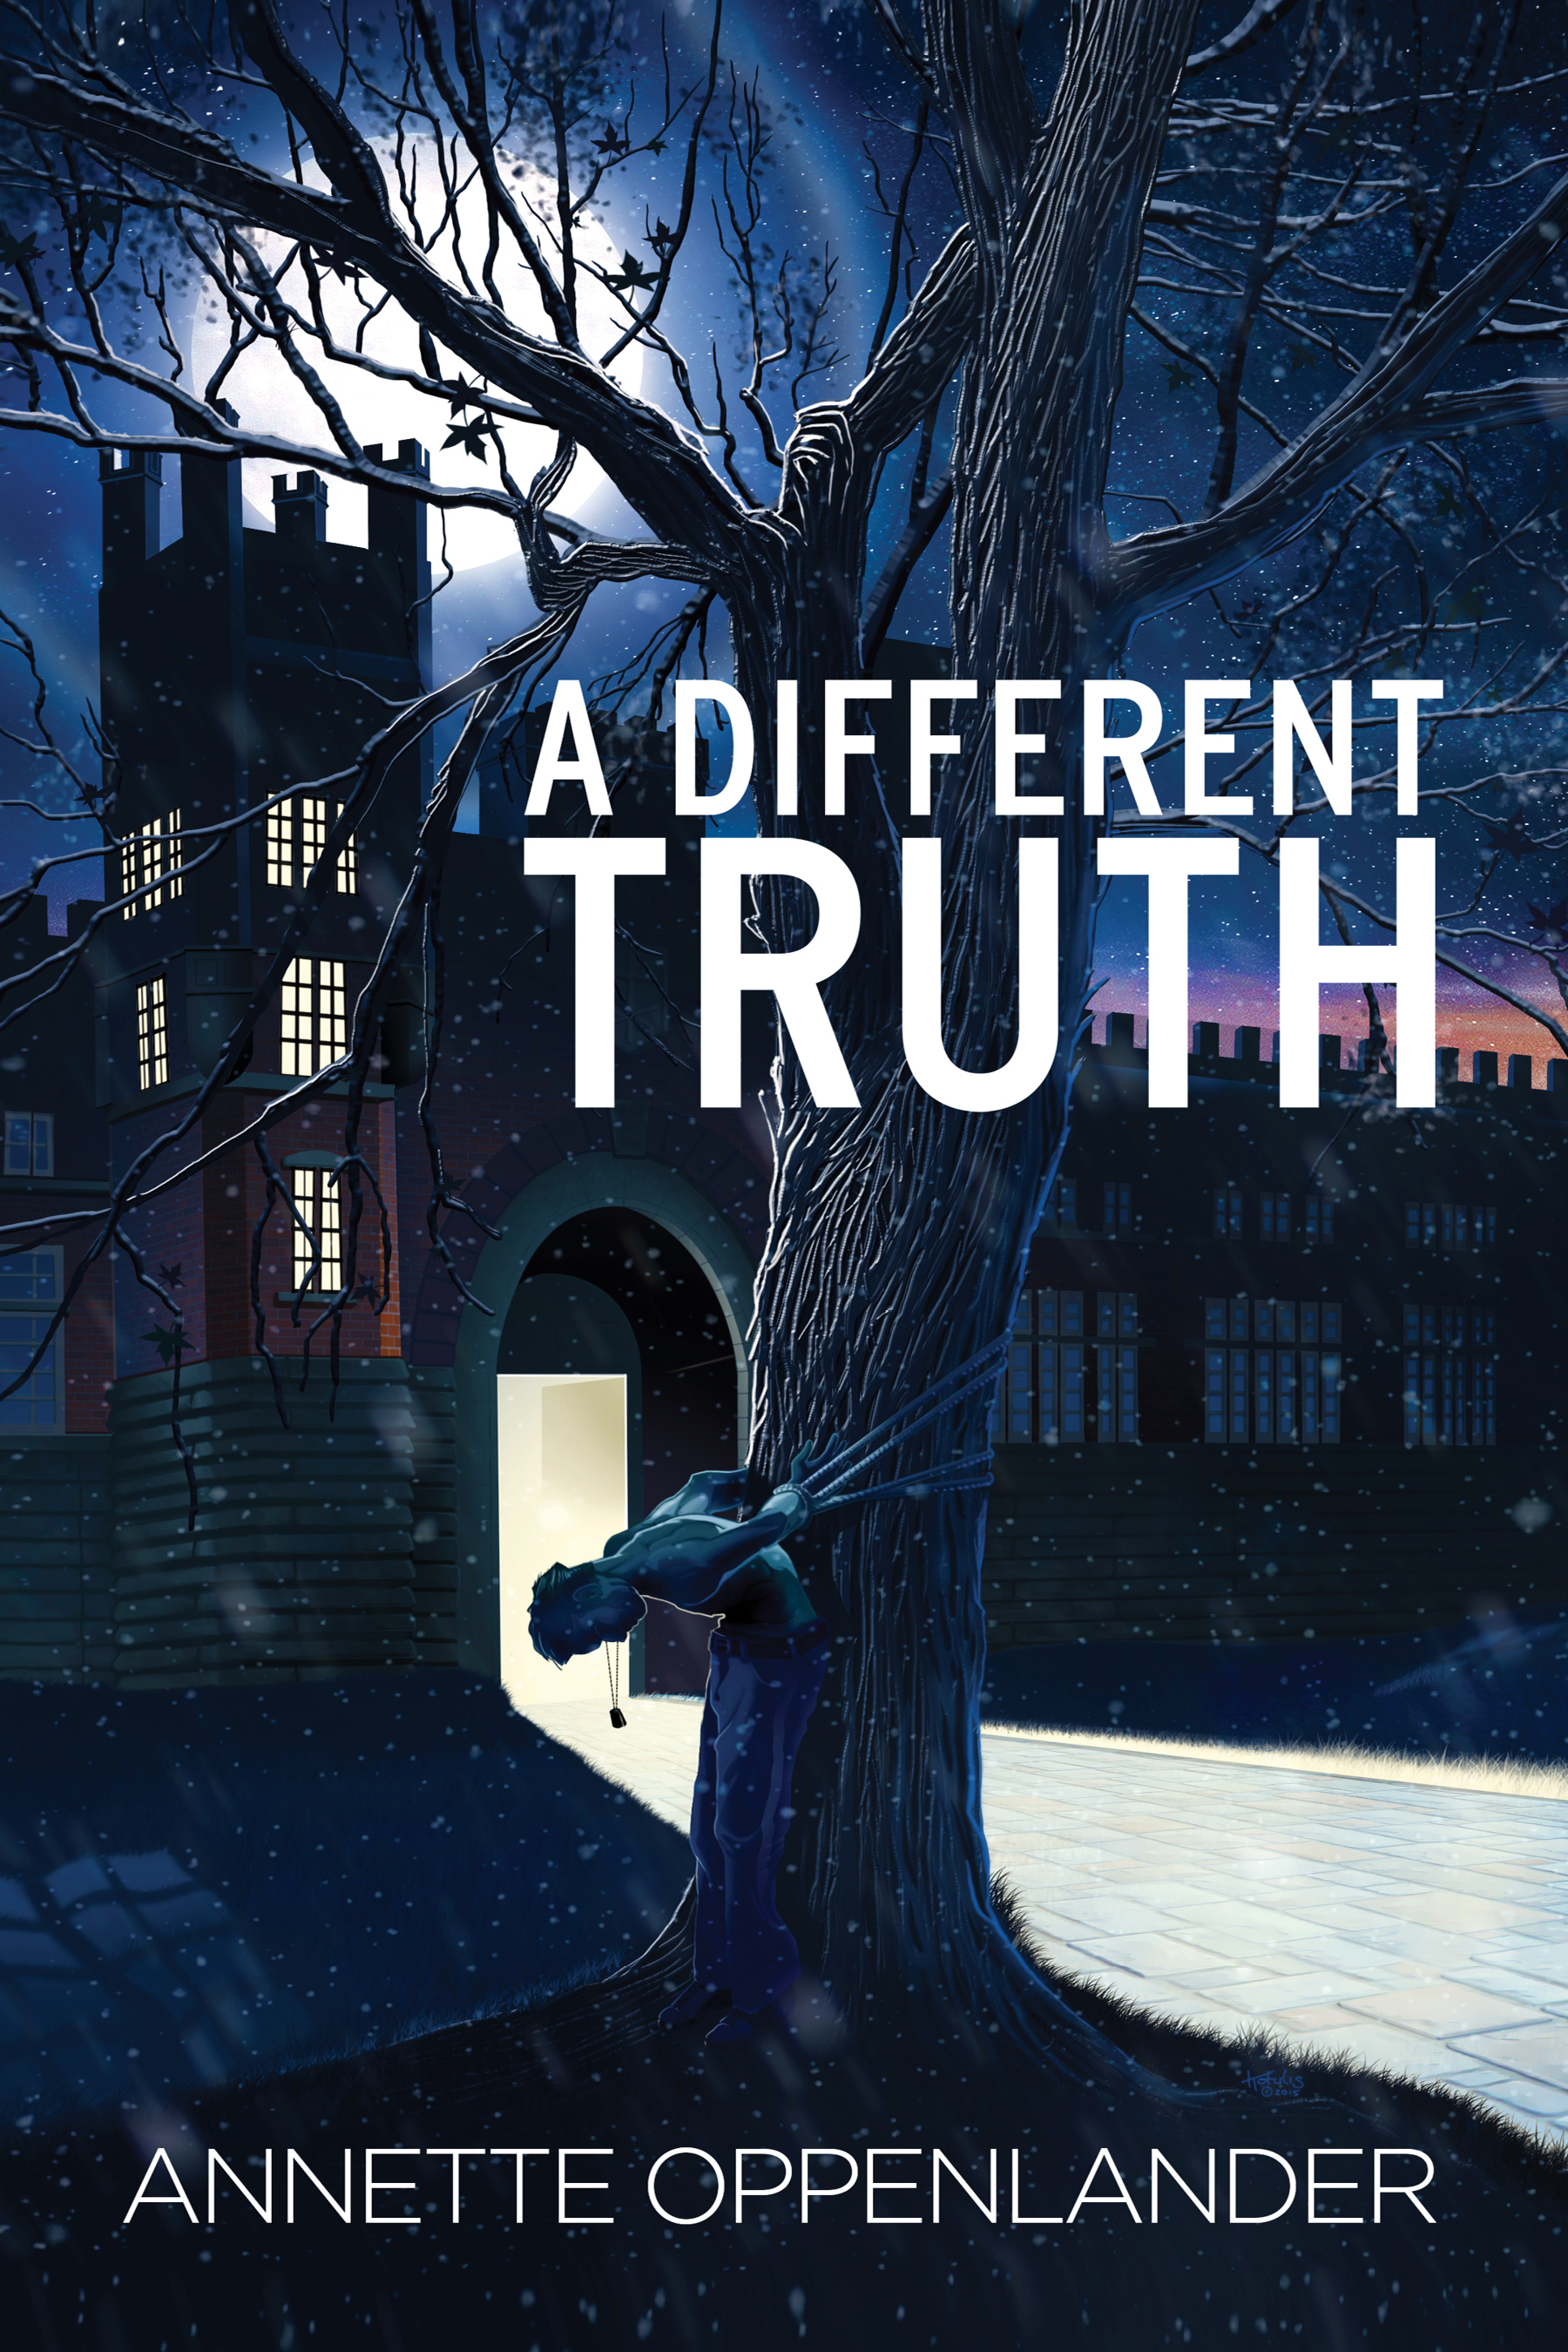 FREE: A Different Truth by Annette Oppenlander